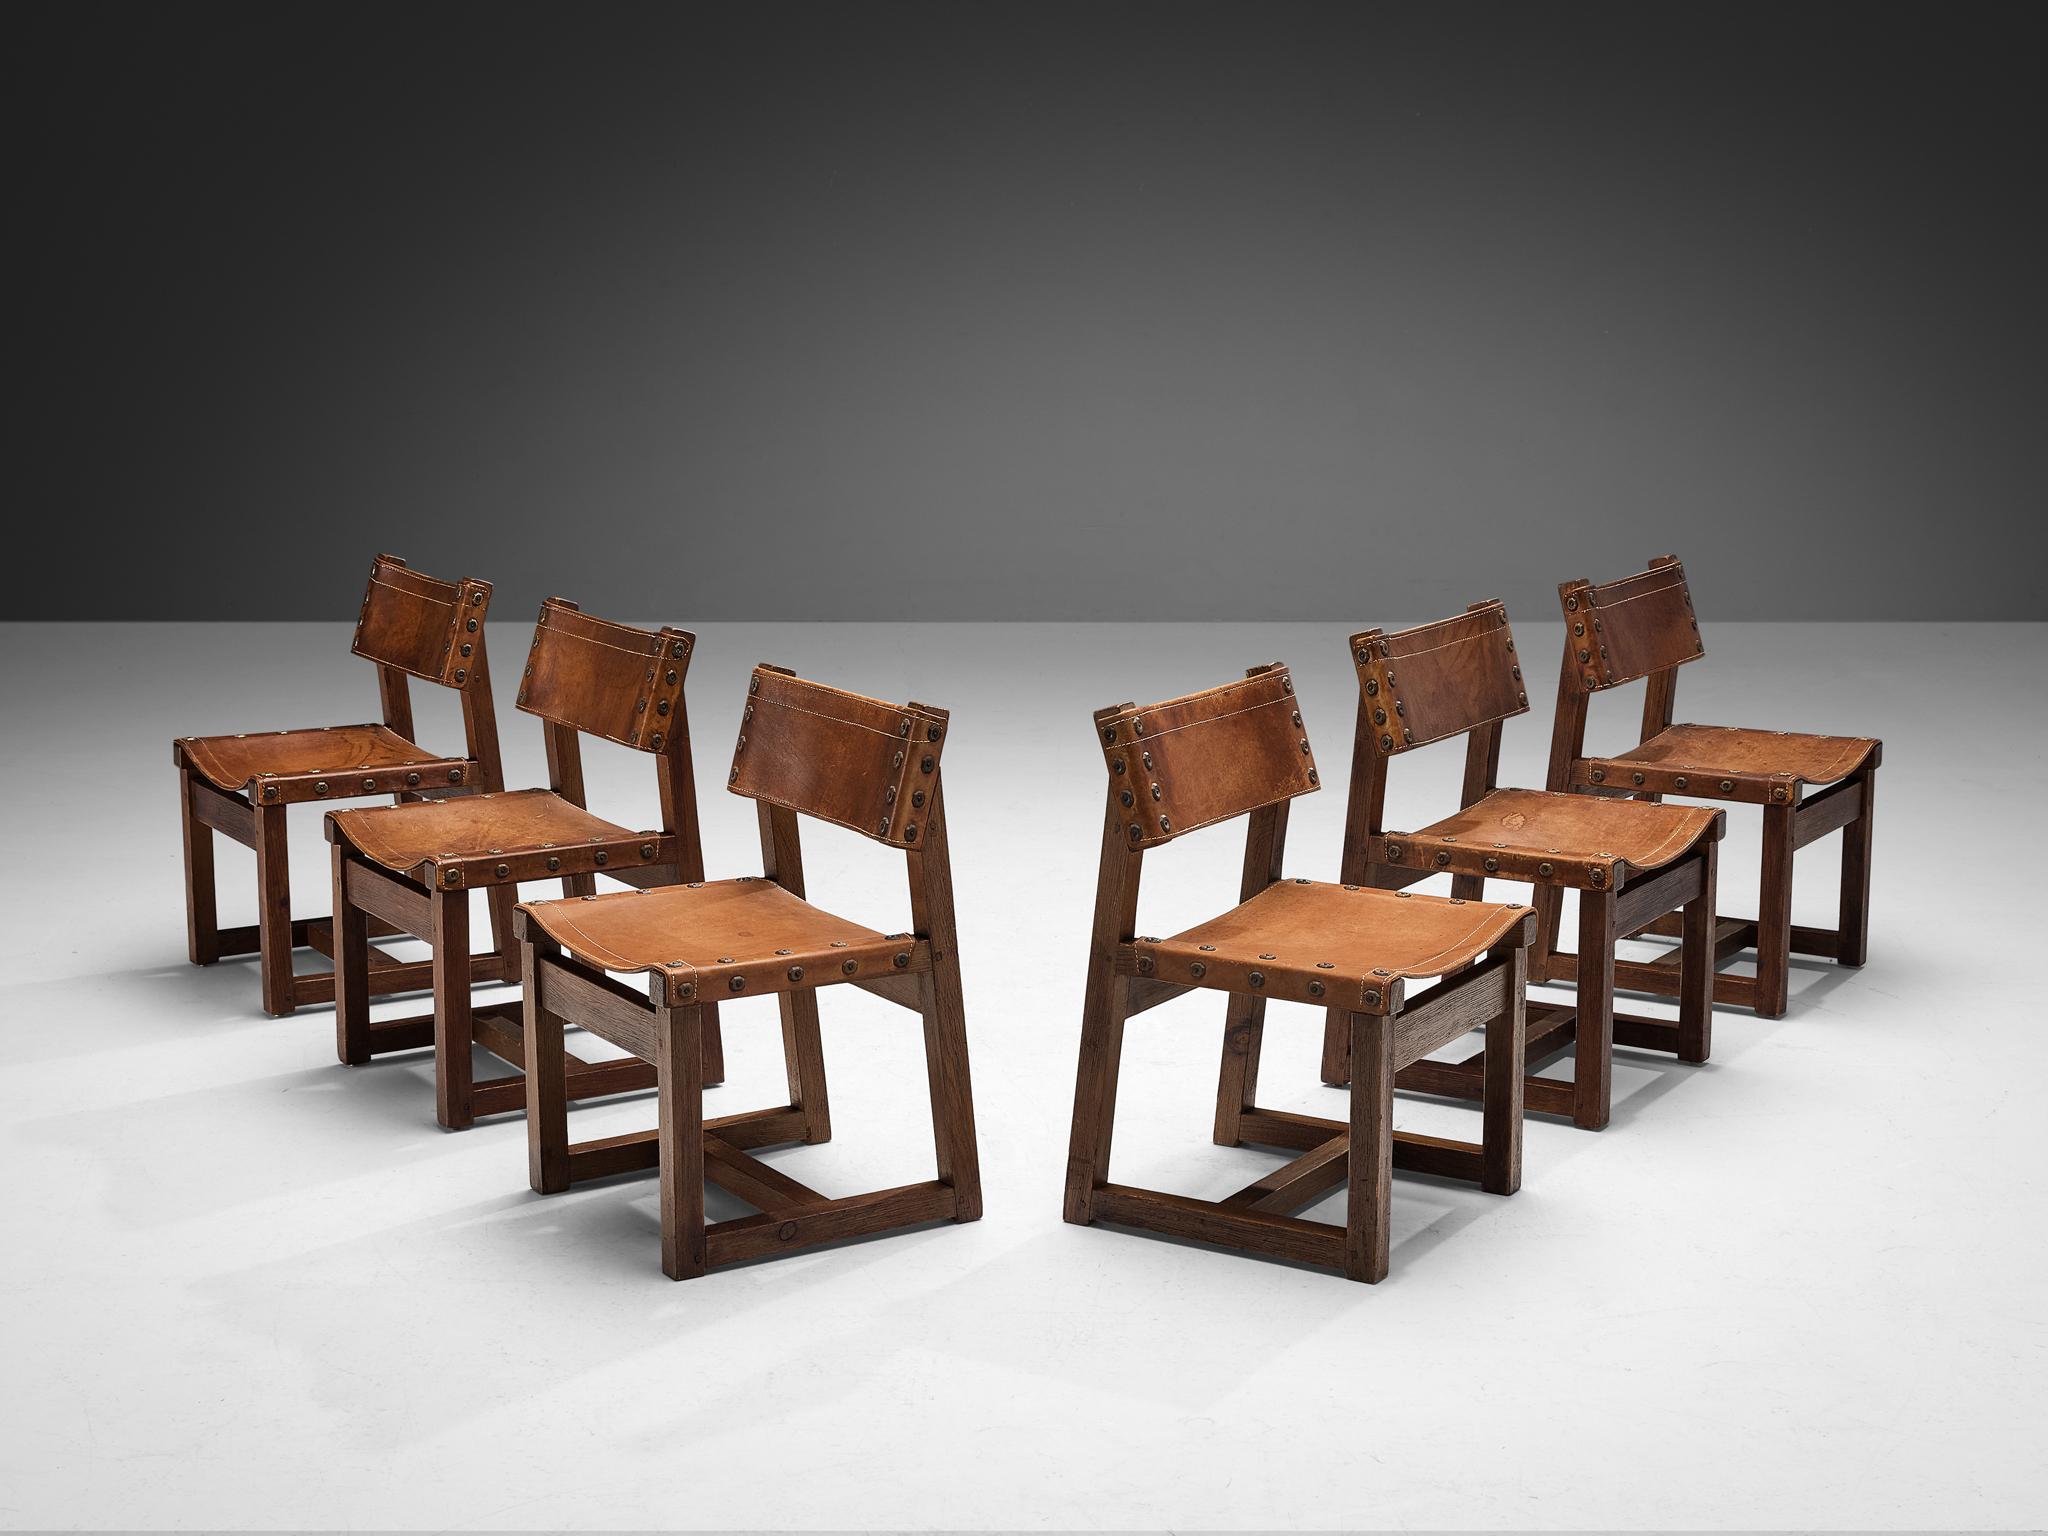 Biosca, set of six dining chairs, saddle leather, pine, brass, Spain, 1950s 

Sturdy chairs manufactured by the Spanish Biosca. These chairs are made out of pine and have stunning, cognac leather seating in patinated condition. The chairs have a